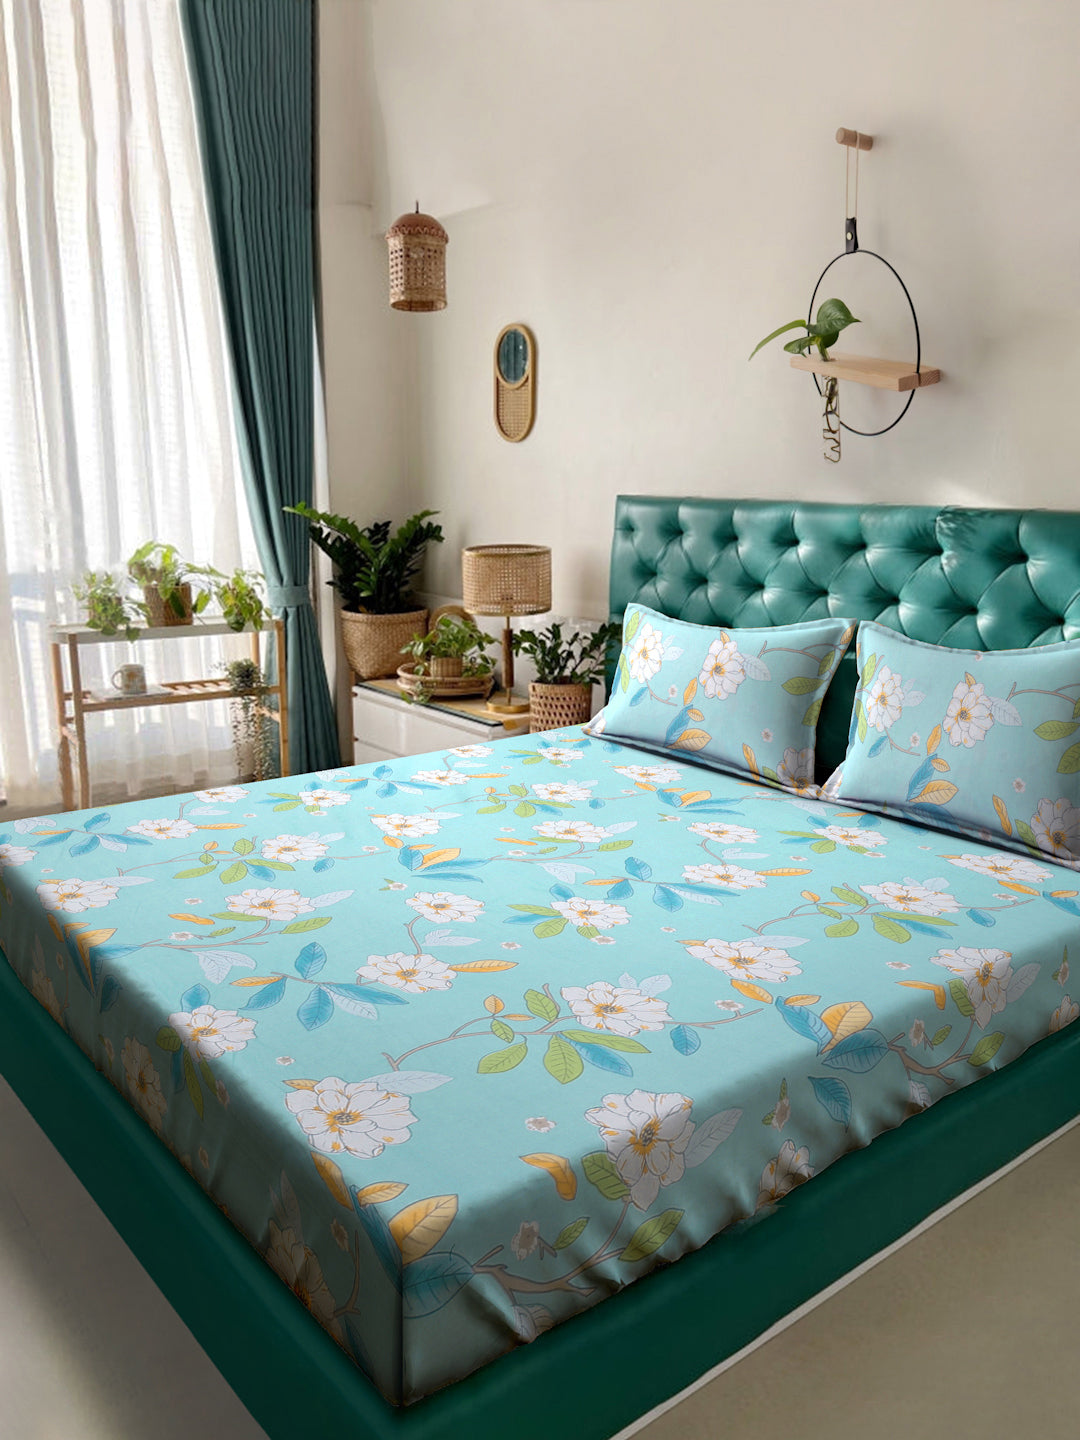 Klotthe Multi Floral 300 TC Cotton Blend Double Bedsheet with 2 Pillow covers